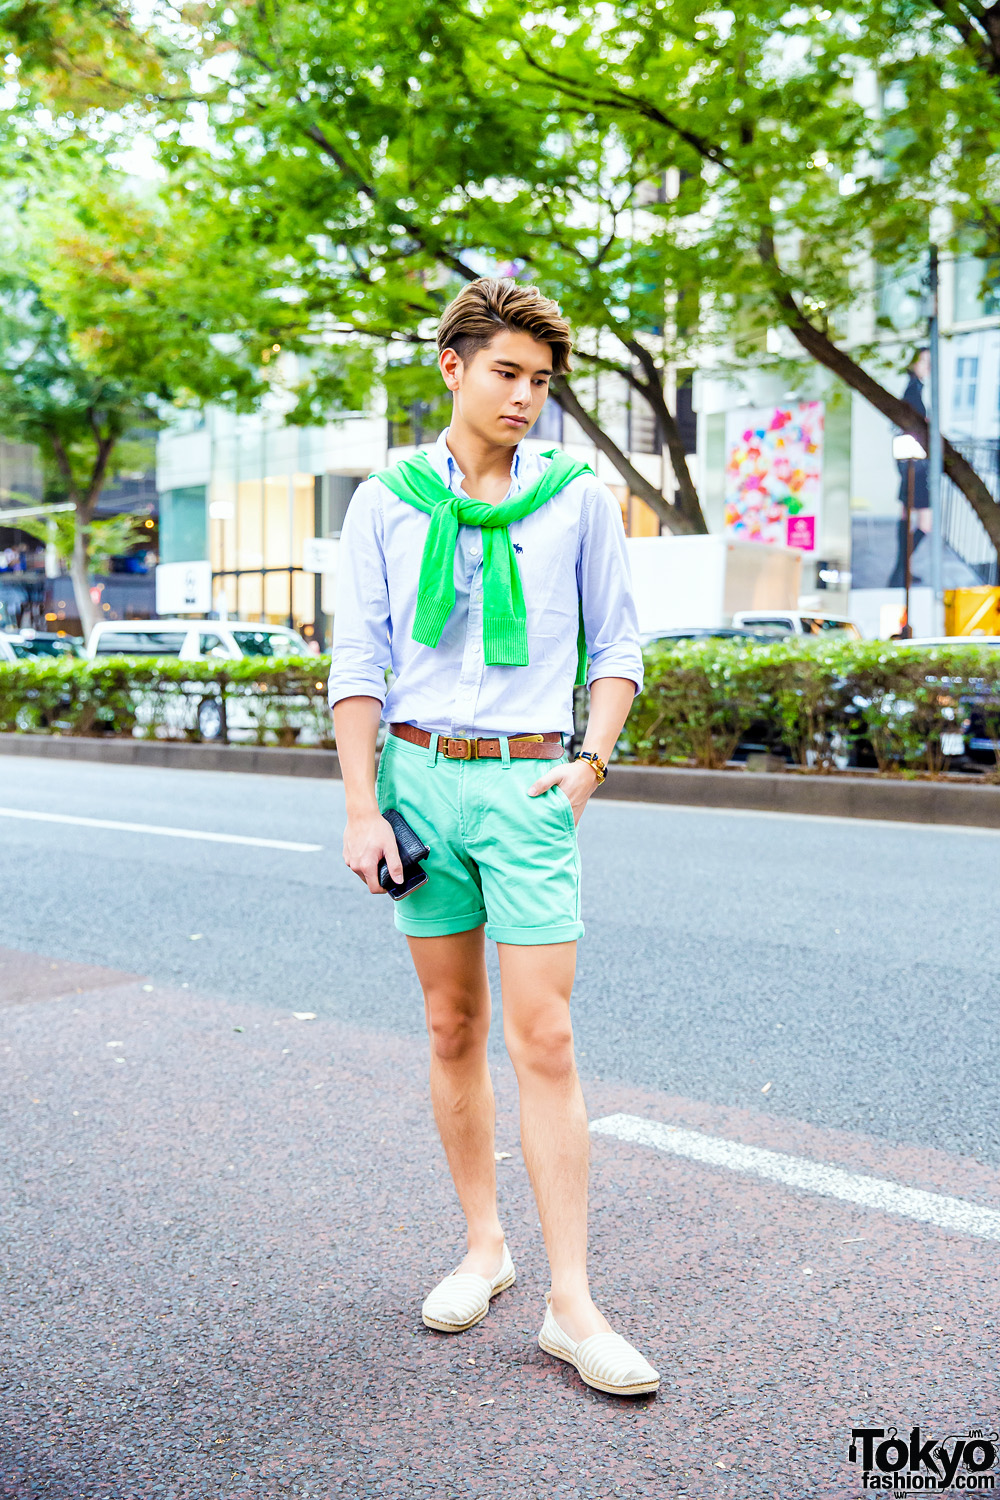 Preppy Menswear Style in Harajuku w/ Abercrombie & Fitch Shirt, Knit Sweater, Cuffed Shorts & Espadrilles